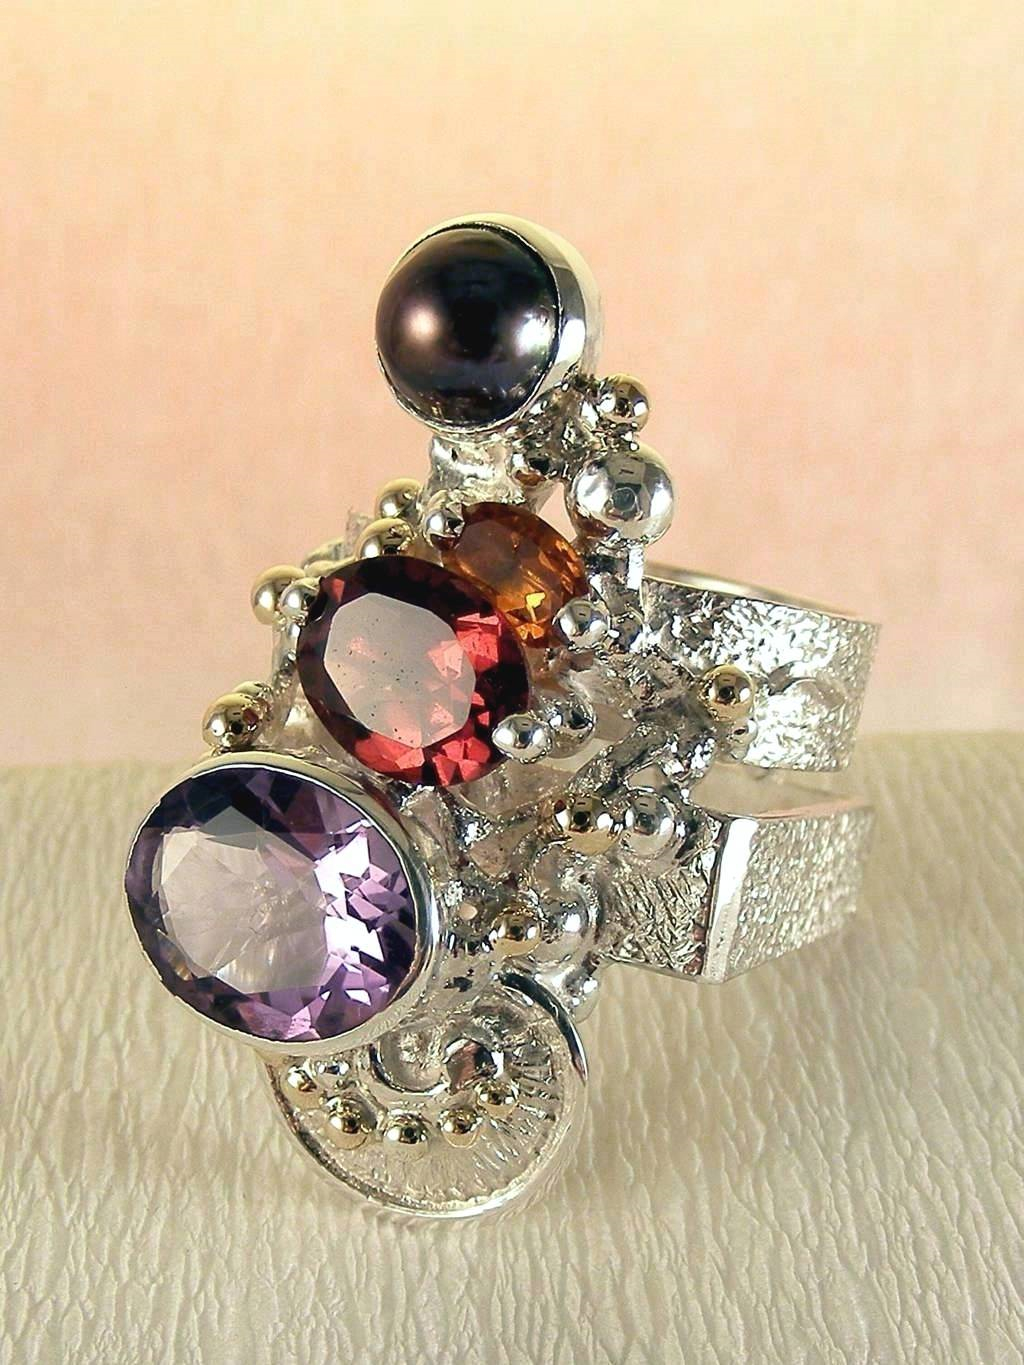 jewelry with semi precious stones, jewelry made by artist in silver and gold, facet cut gemstones in jewelry, gregory pyra piro cyber ring 2631, rings in art and craft galleries, sculptural jewellery, mixed metal art jewellery in silver and gold, cyber ring with amethyst and garnet, cyber ring with citrine and garnet, cyber ring with citrine and amethyst, cyber ring with pearl